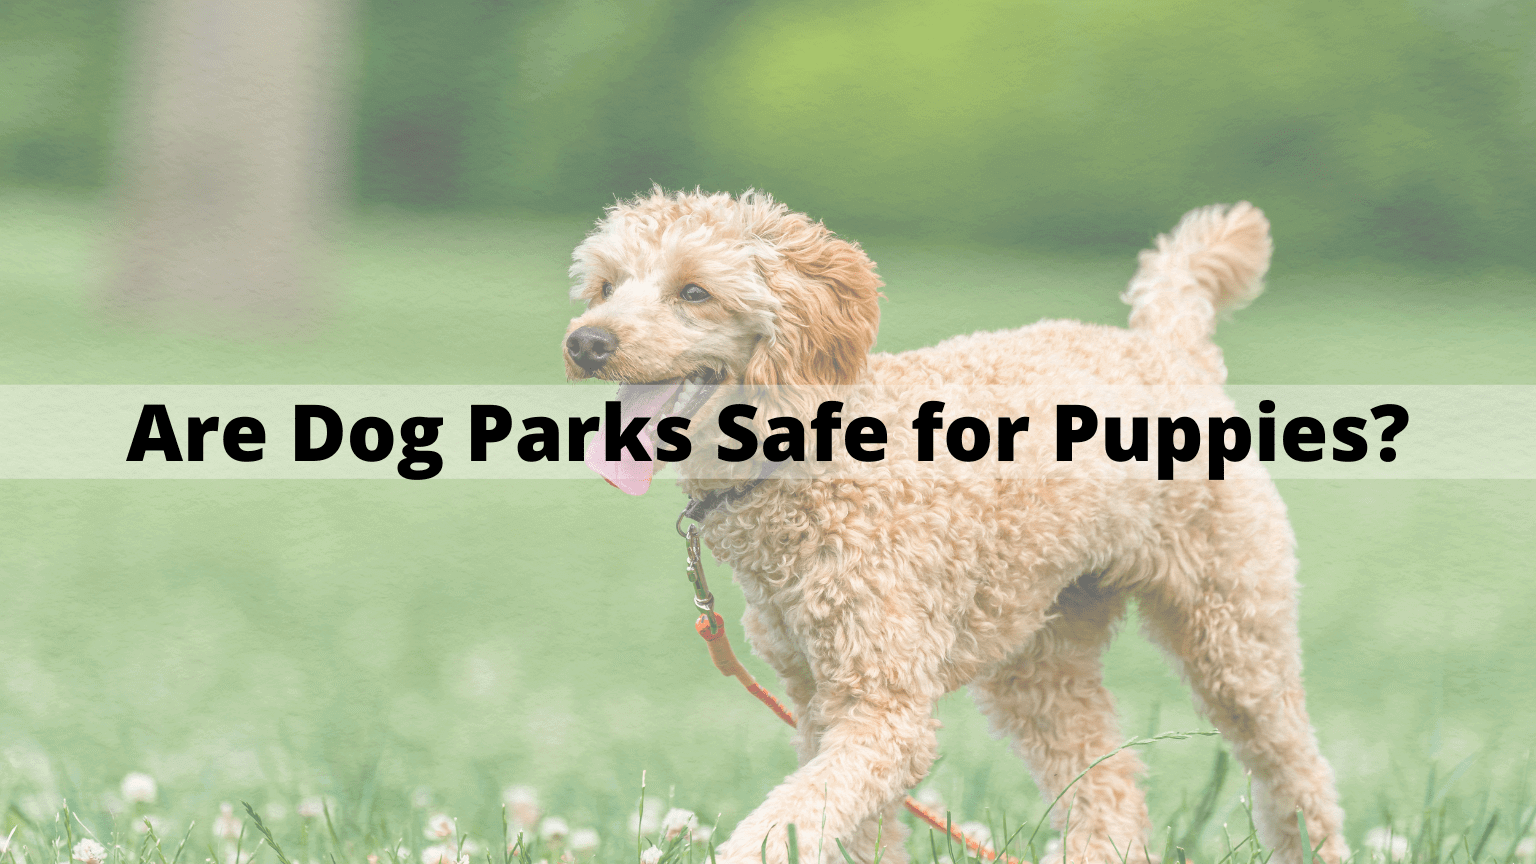 Are Dog Parks Safe for Puppies?